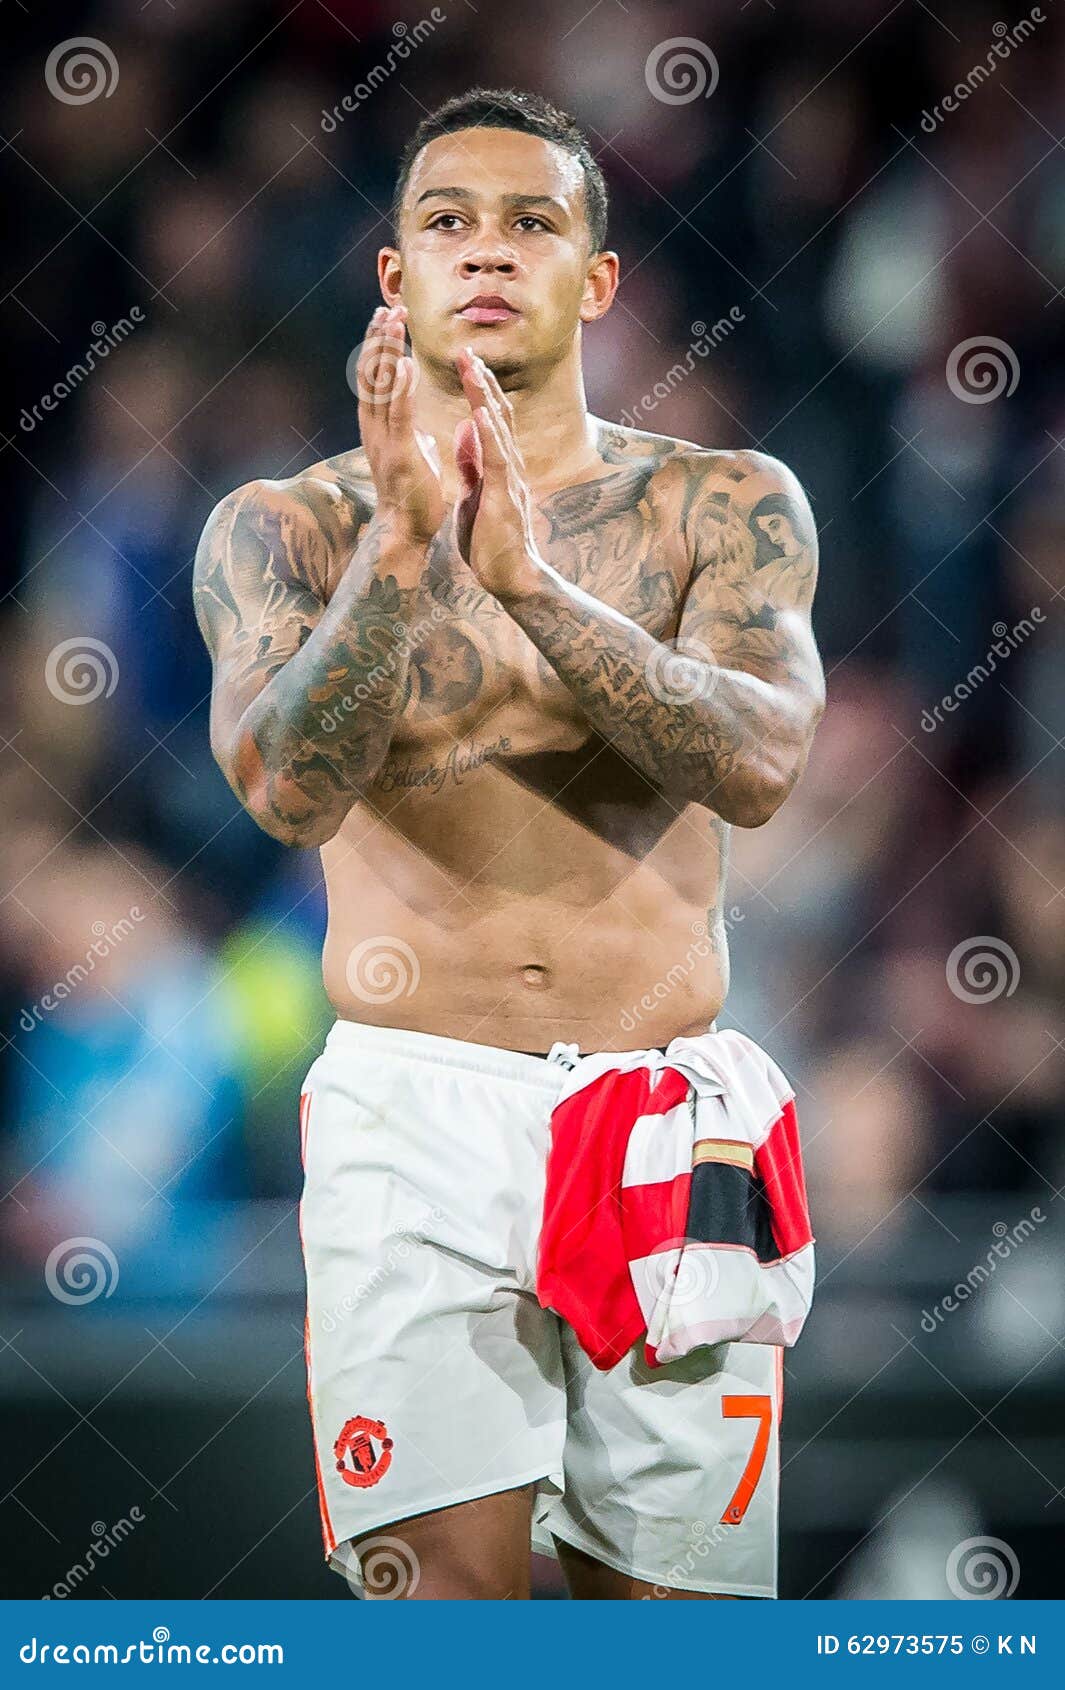 Memphis Depay without Shirt Editorial Image - Image of september